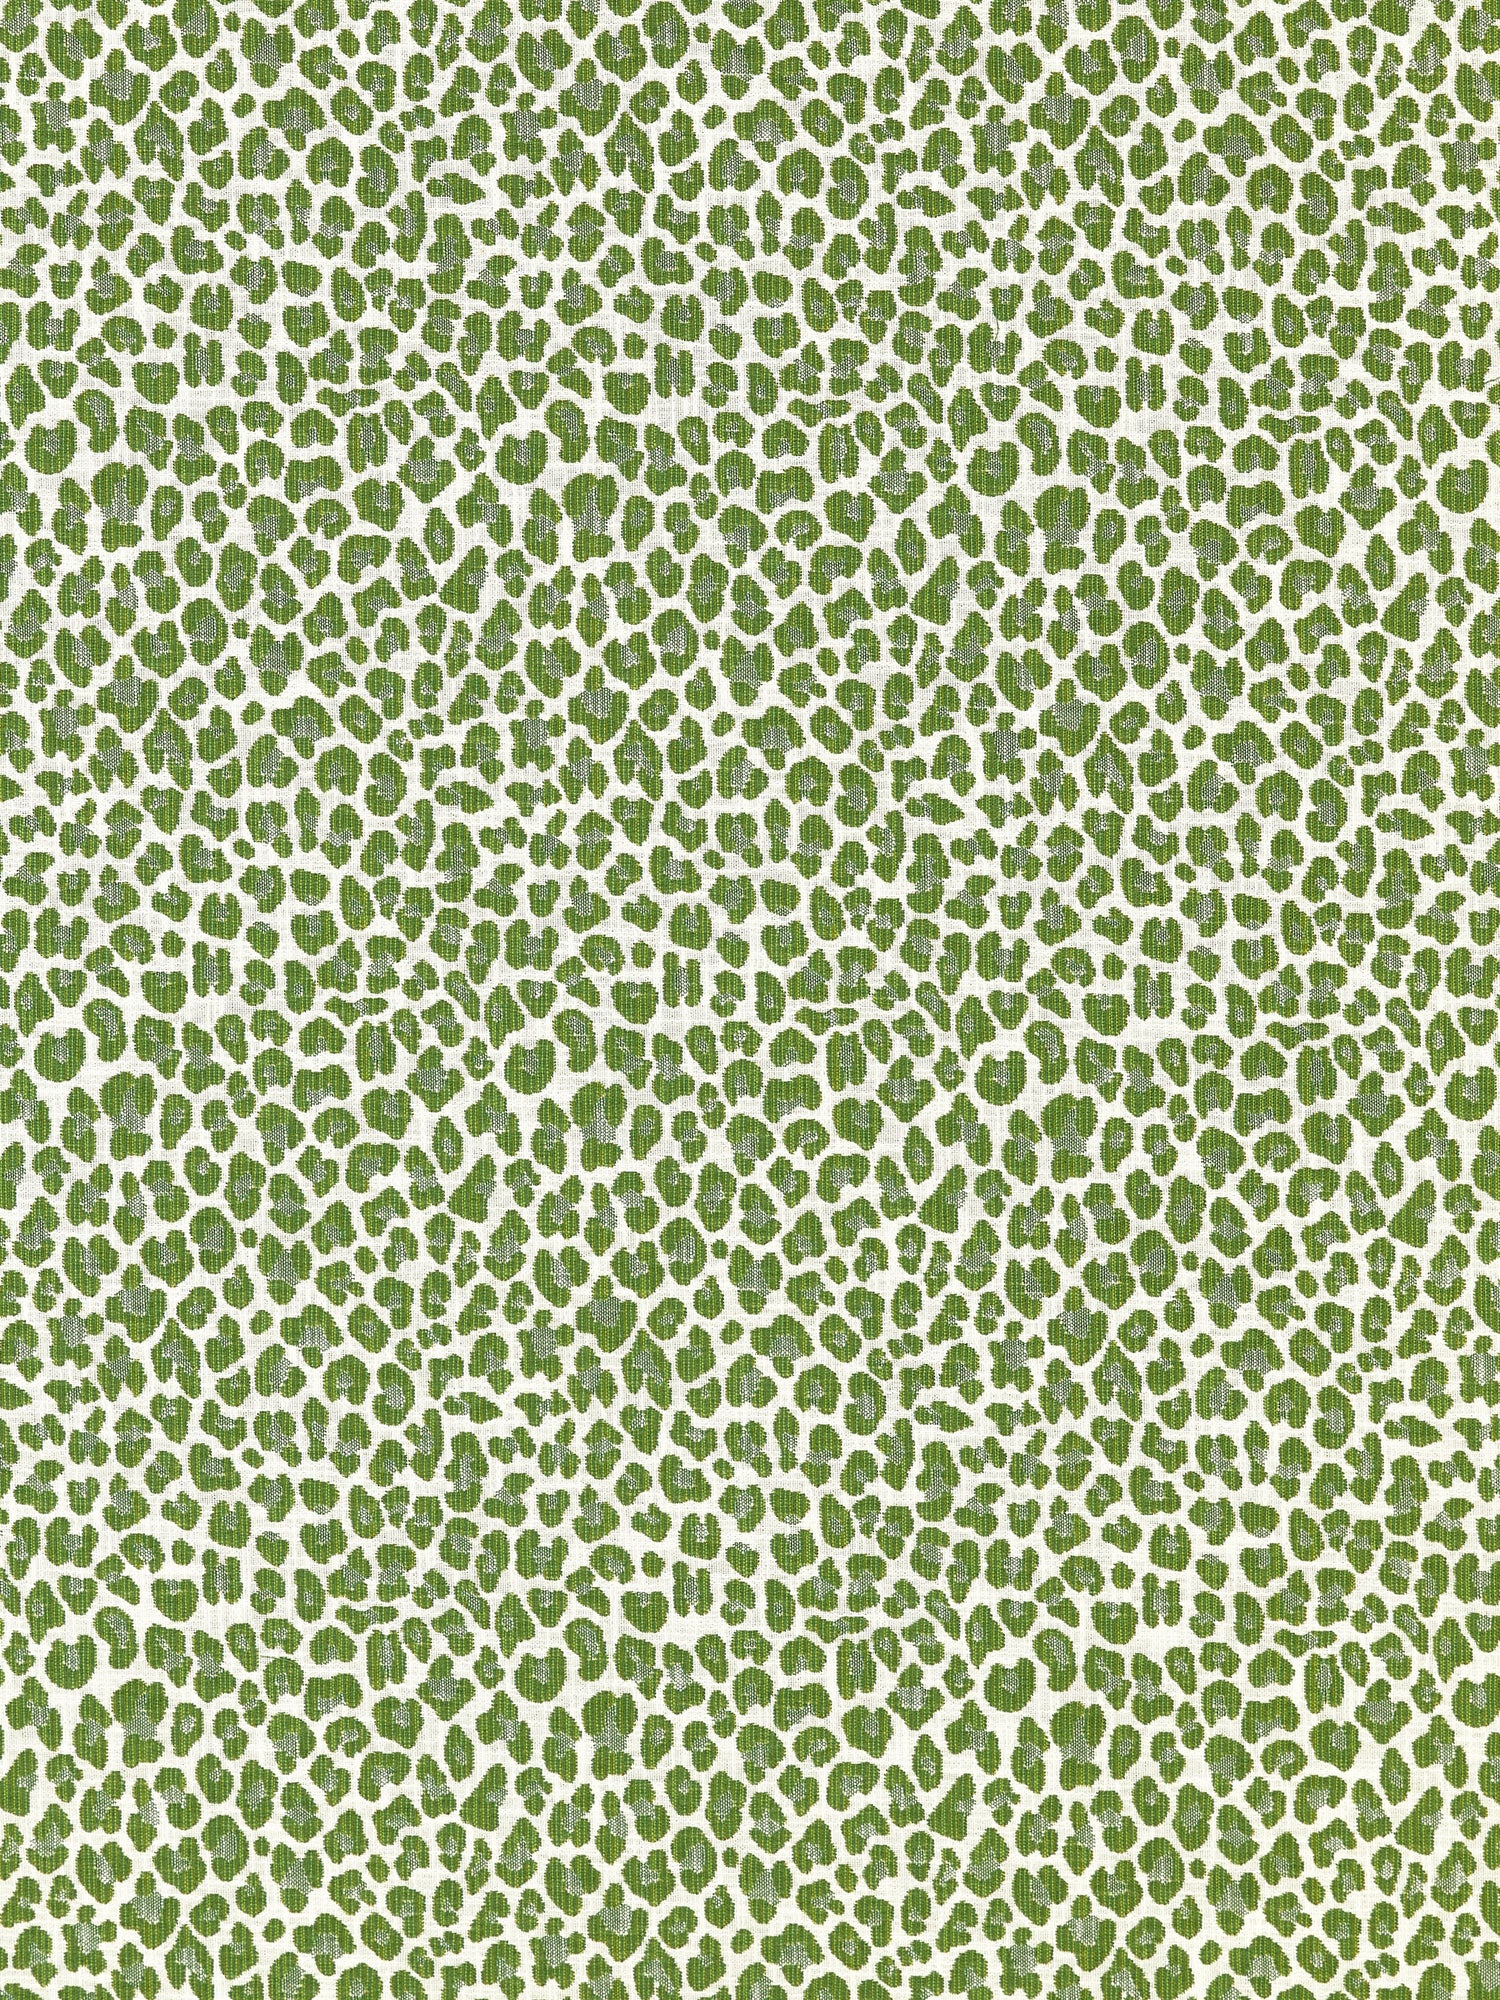 Backyard Bengal fabric in ivy color - pattern number SC 000327316 - by Scalamandre in the Scalamandre Fabrics Book 1 collection